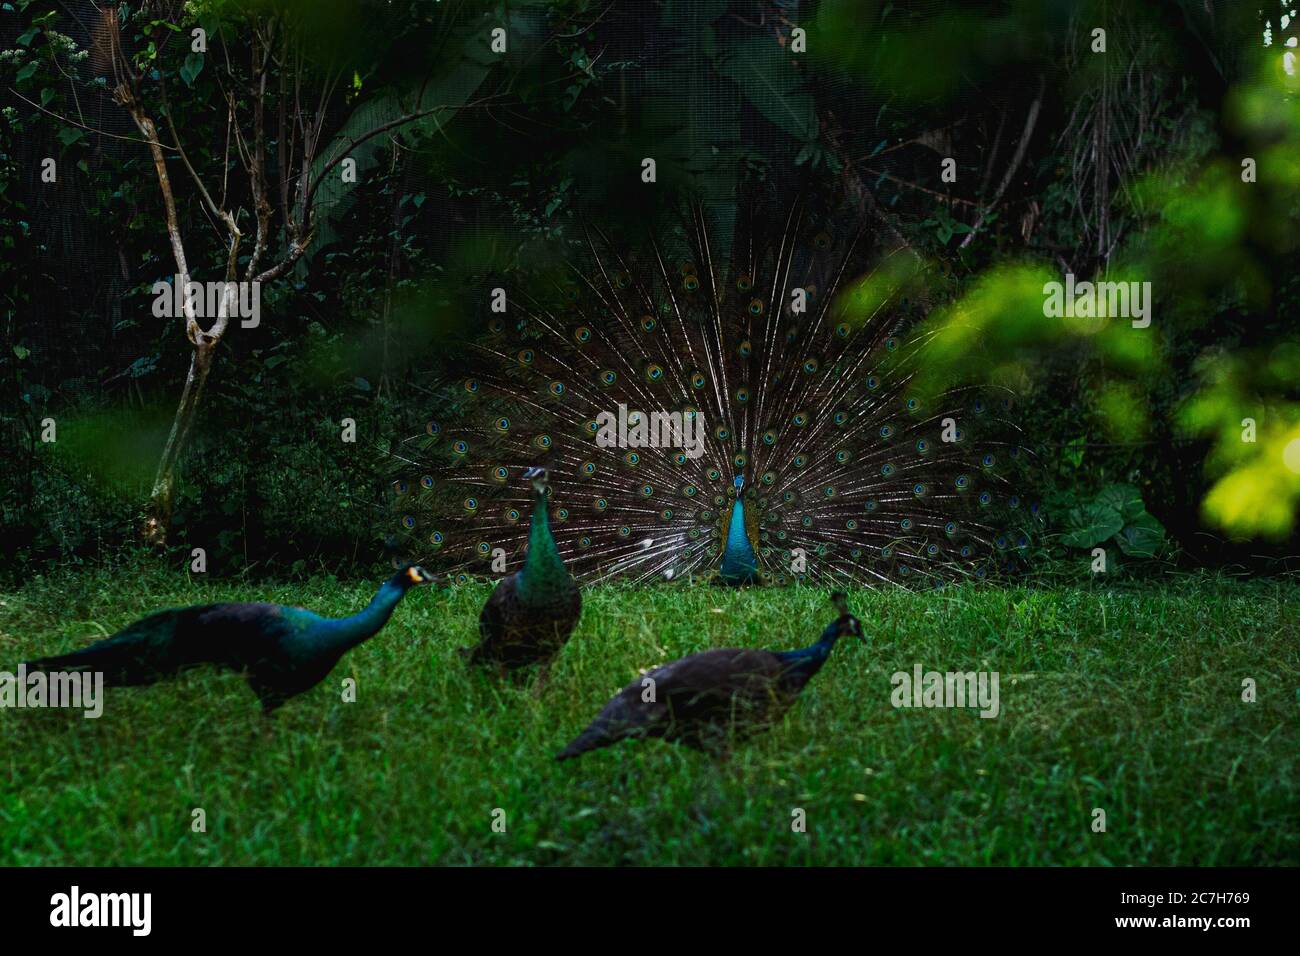 Field with Peafowls on it surrounded by trees and grass under sunlight Stock Photo